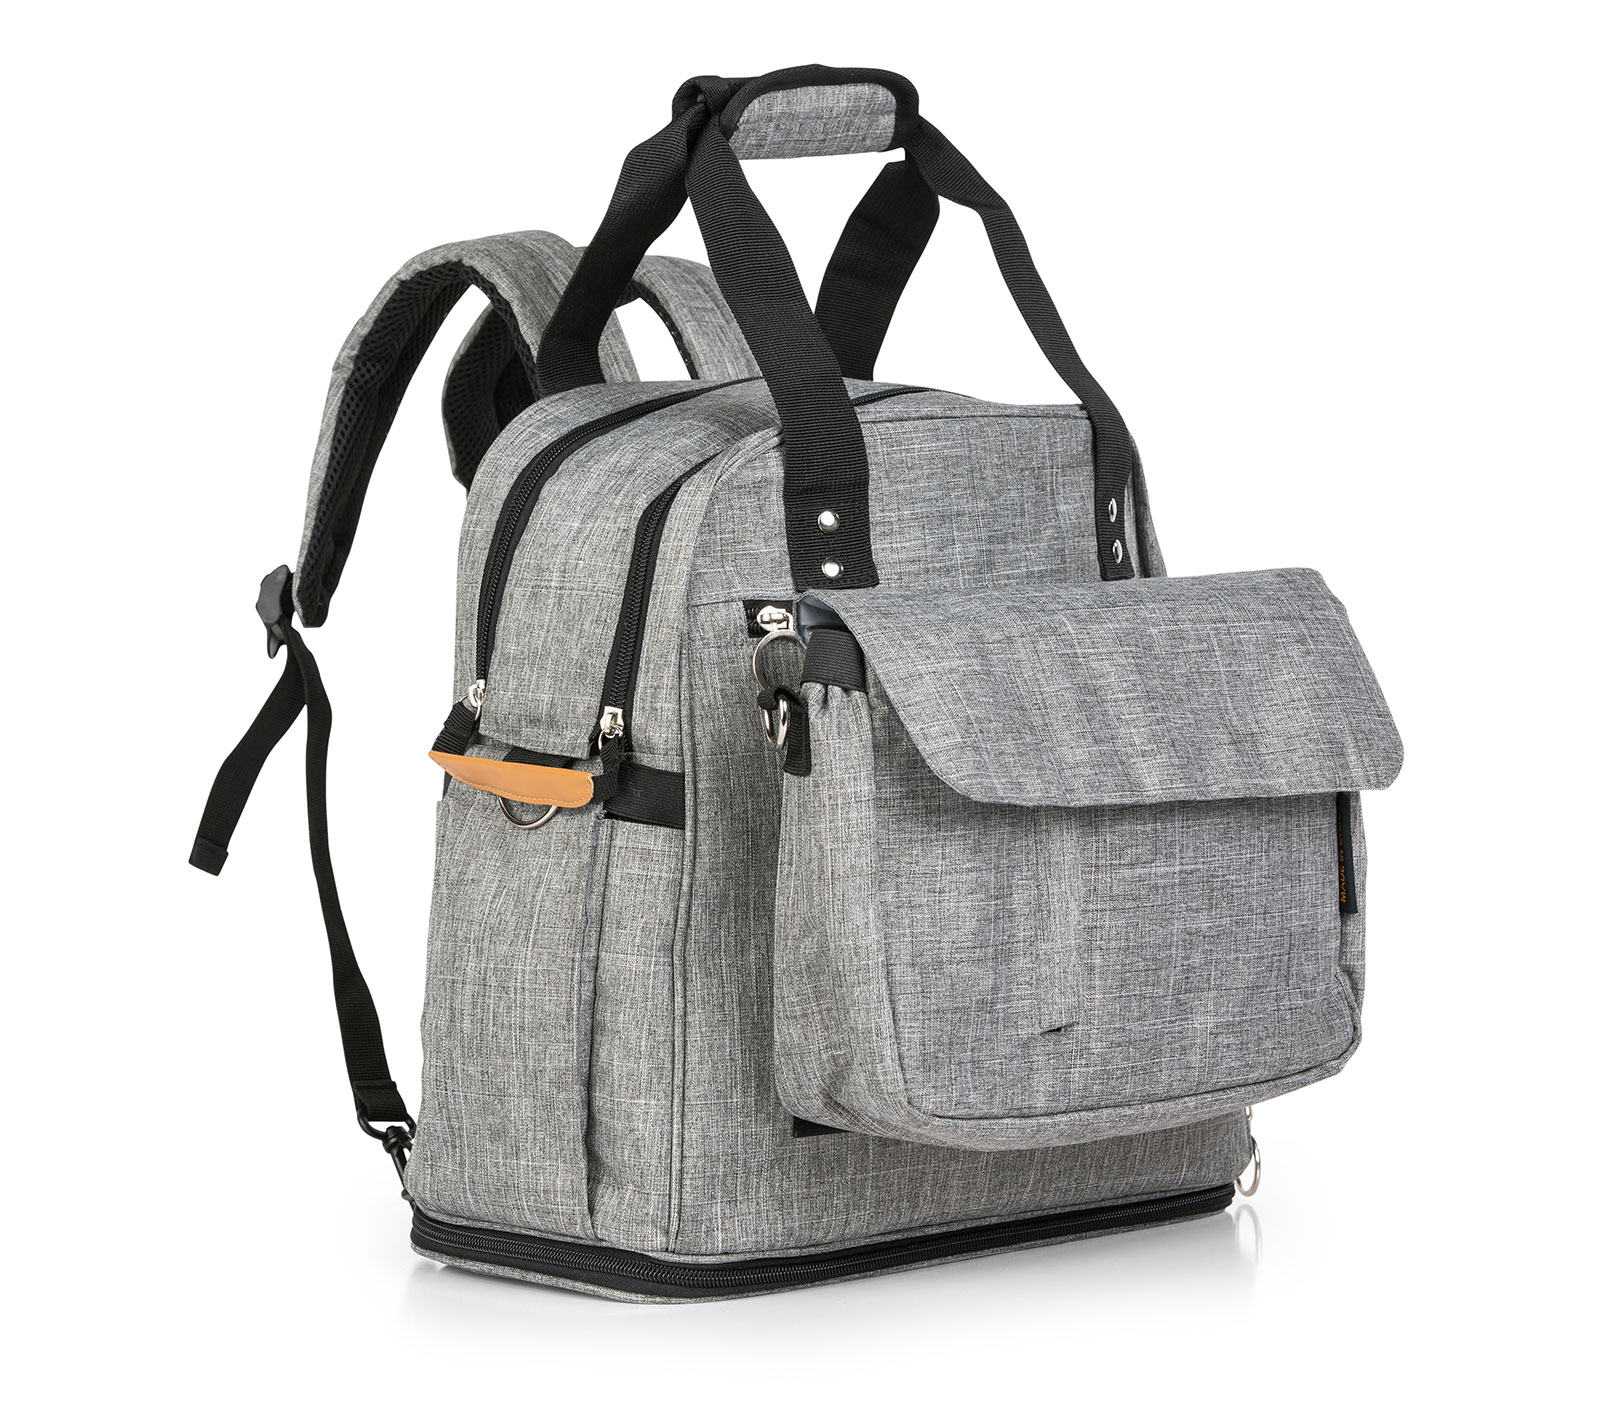 JOJOHUG - Baby Diaper Bag Backpack with Detachable Pouch Changing Pad (Grey)